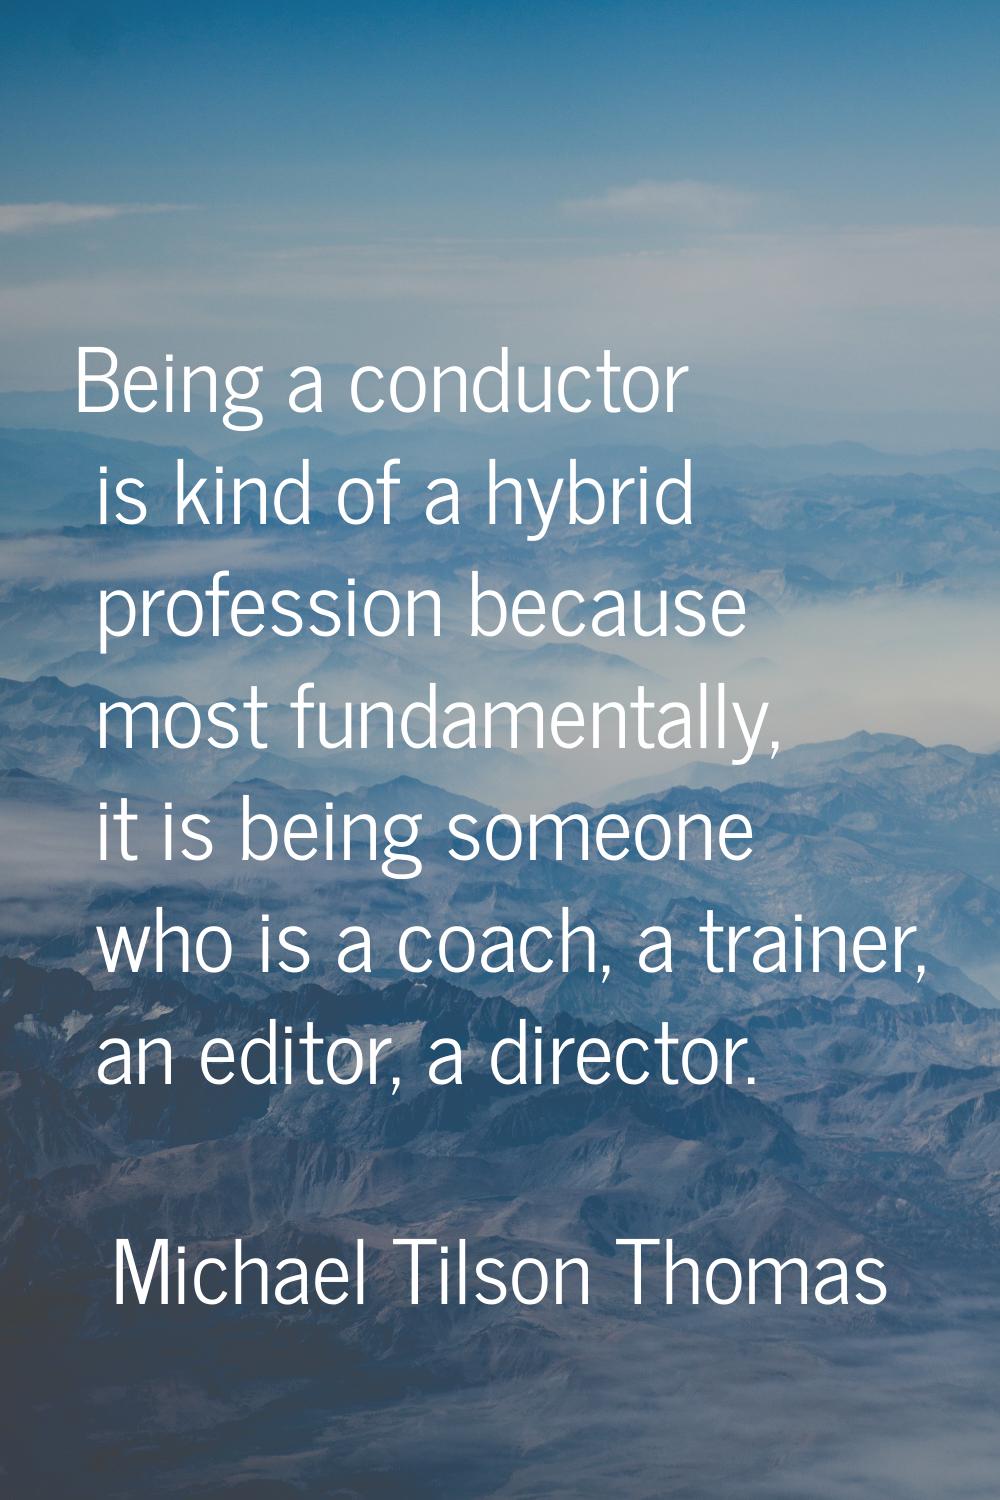 Being a conductor is kind of a hybrid profession because most fundamentally, it is being someone wh